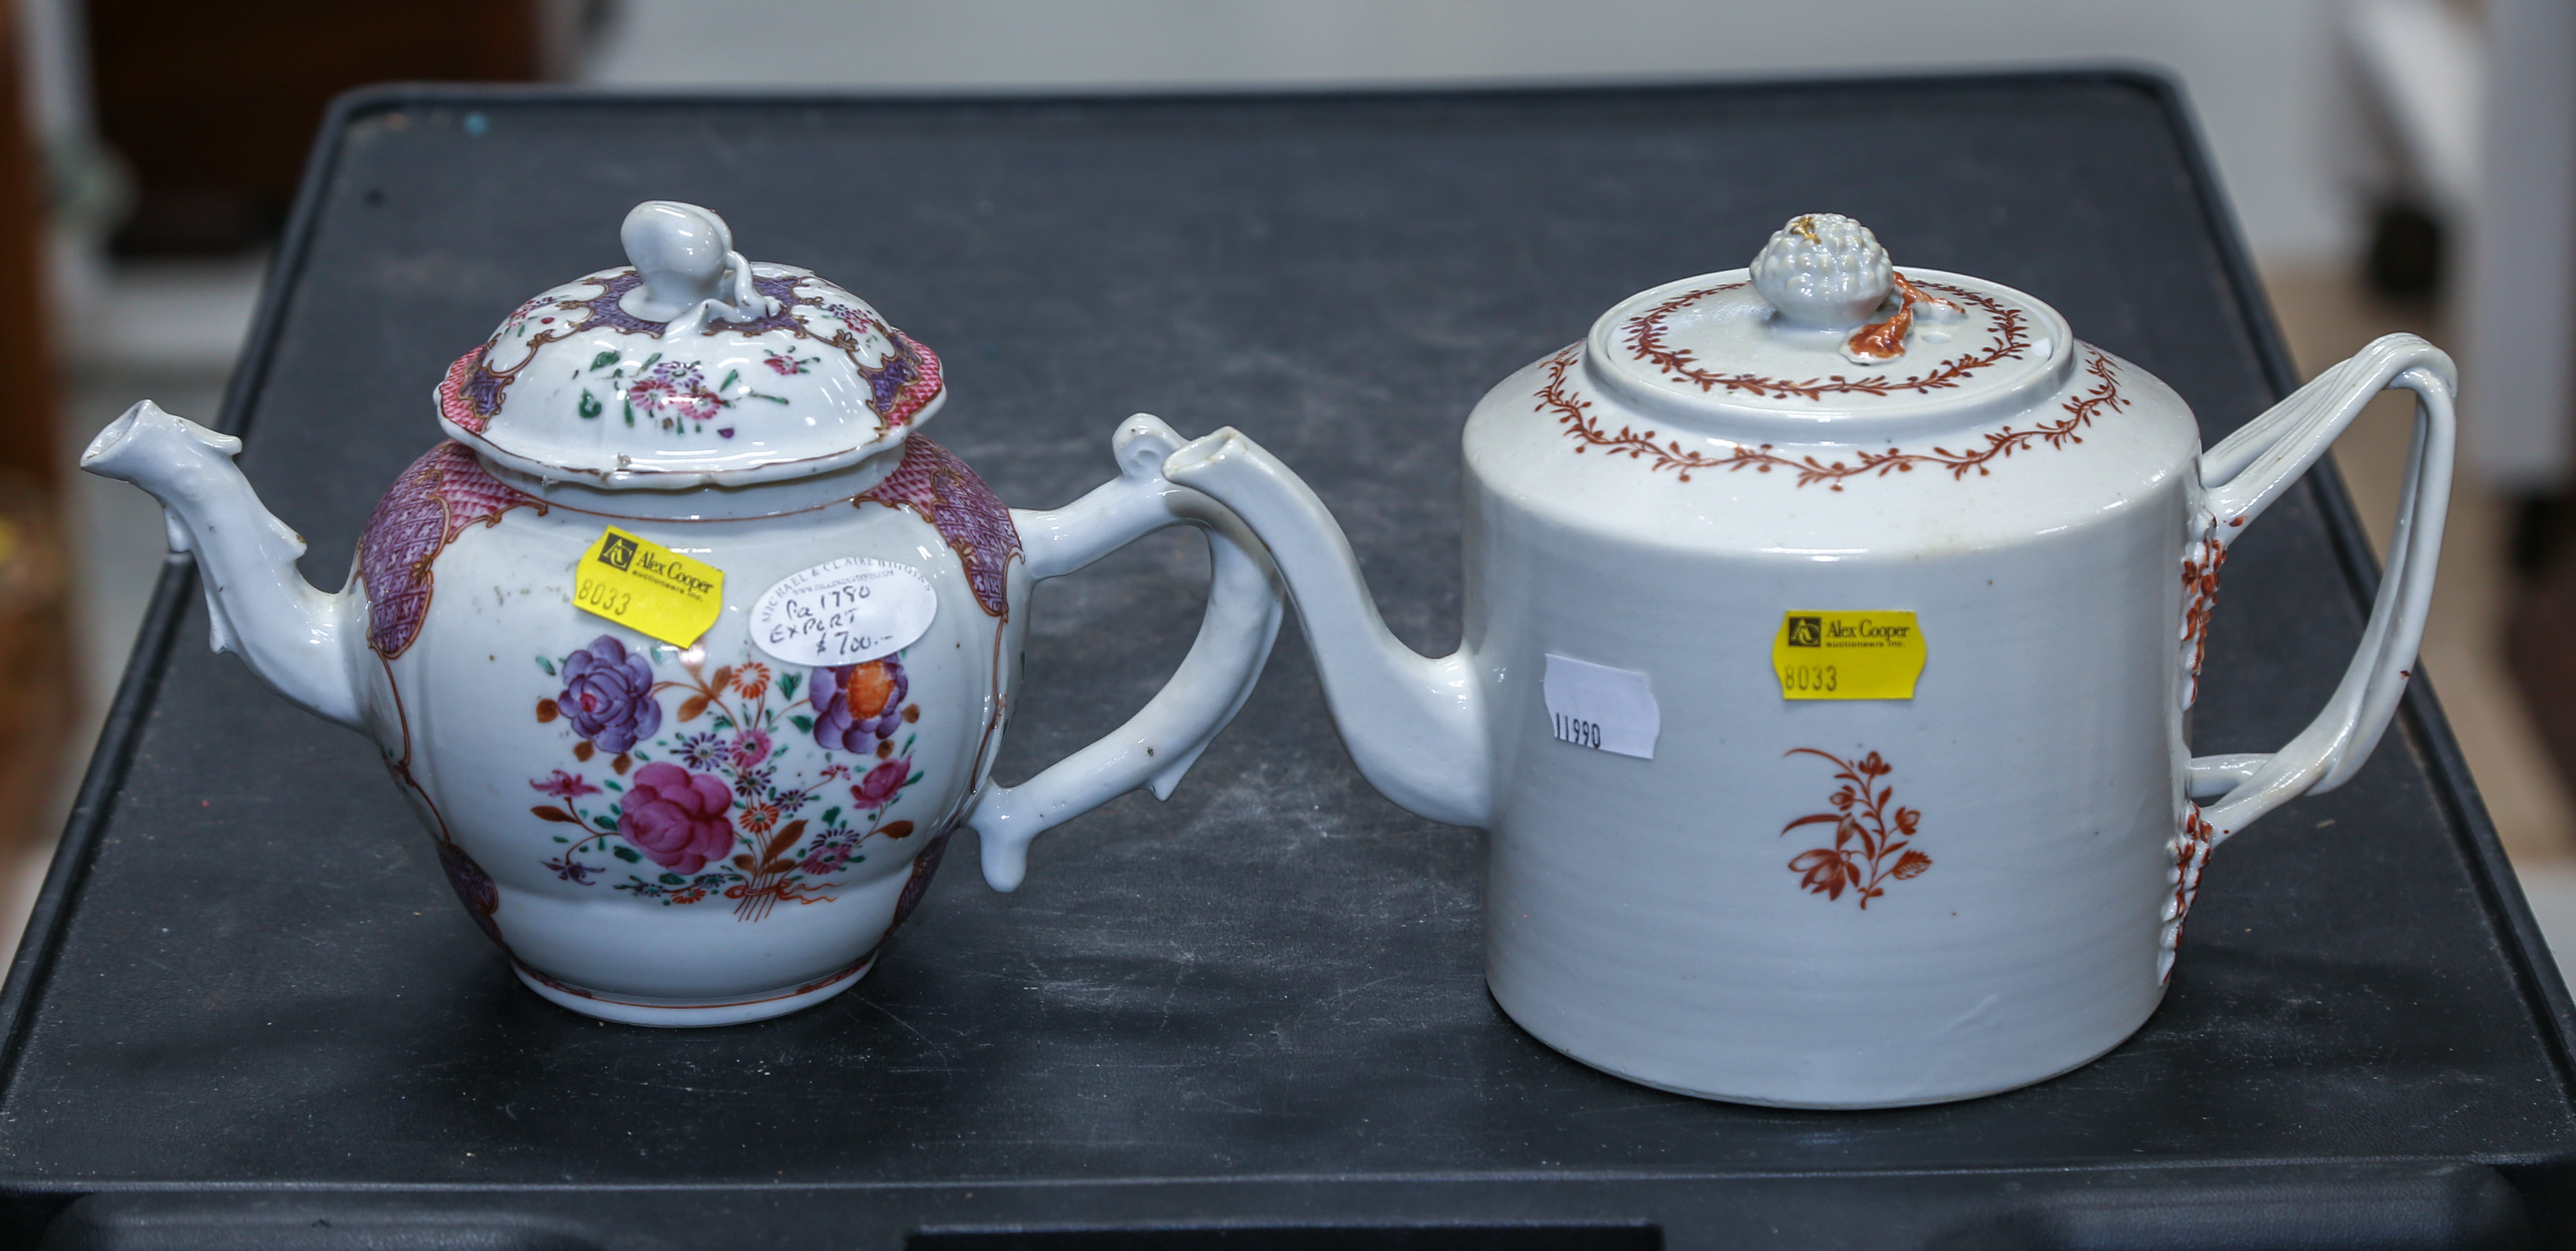 CHINESE EXPORT TEAPOT A CONTINENTAL 3cb209